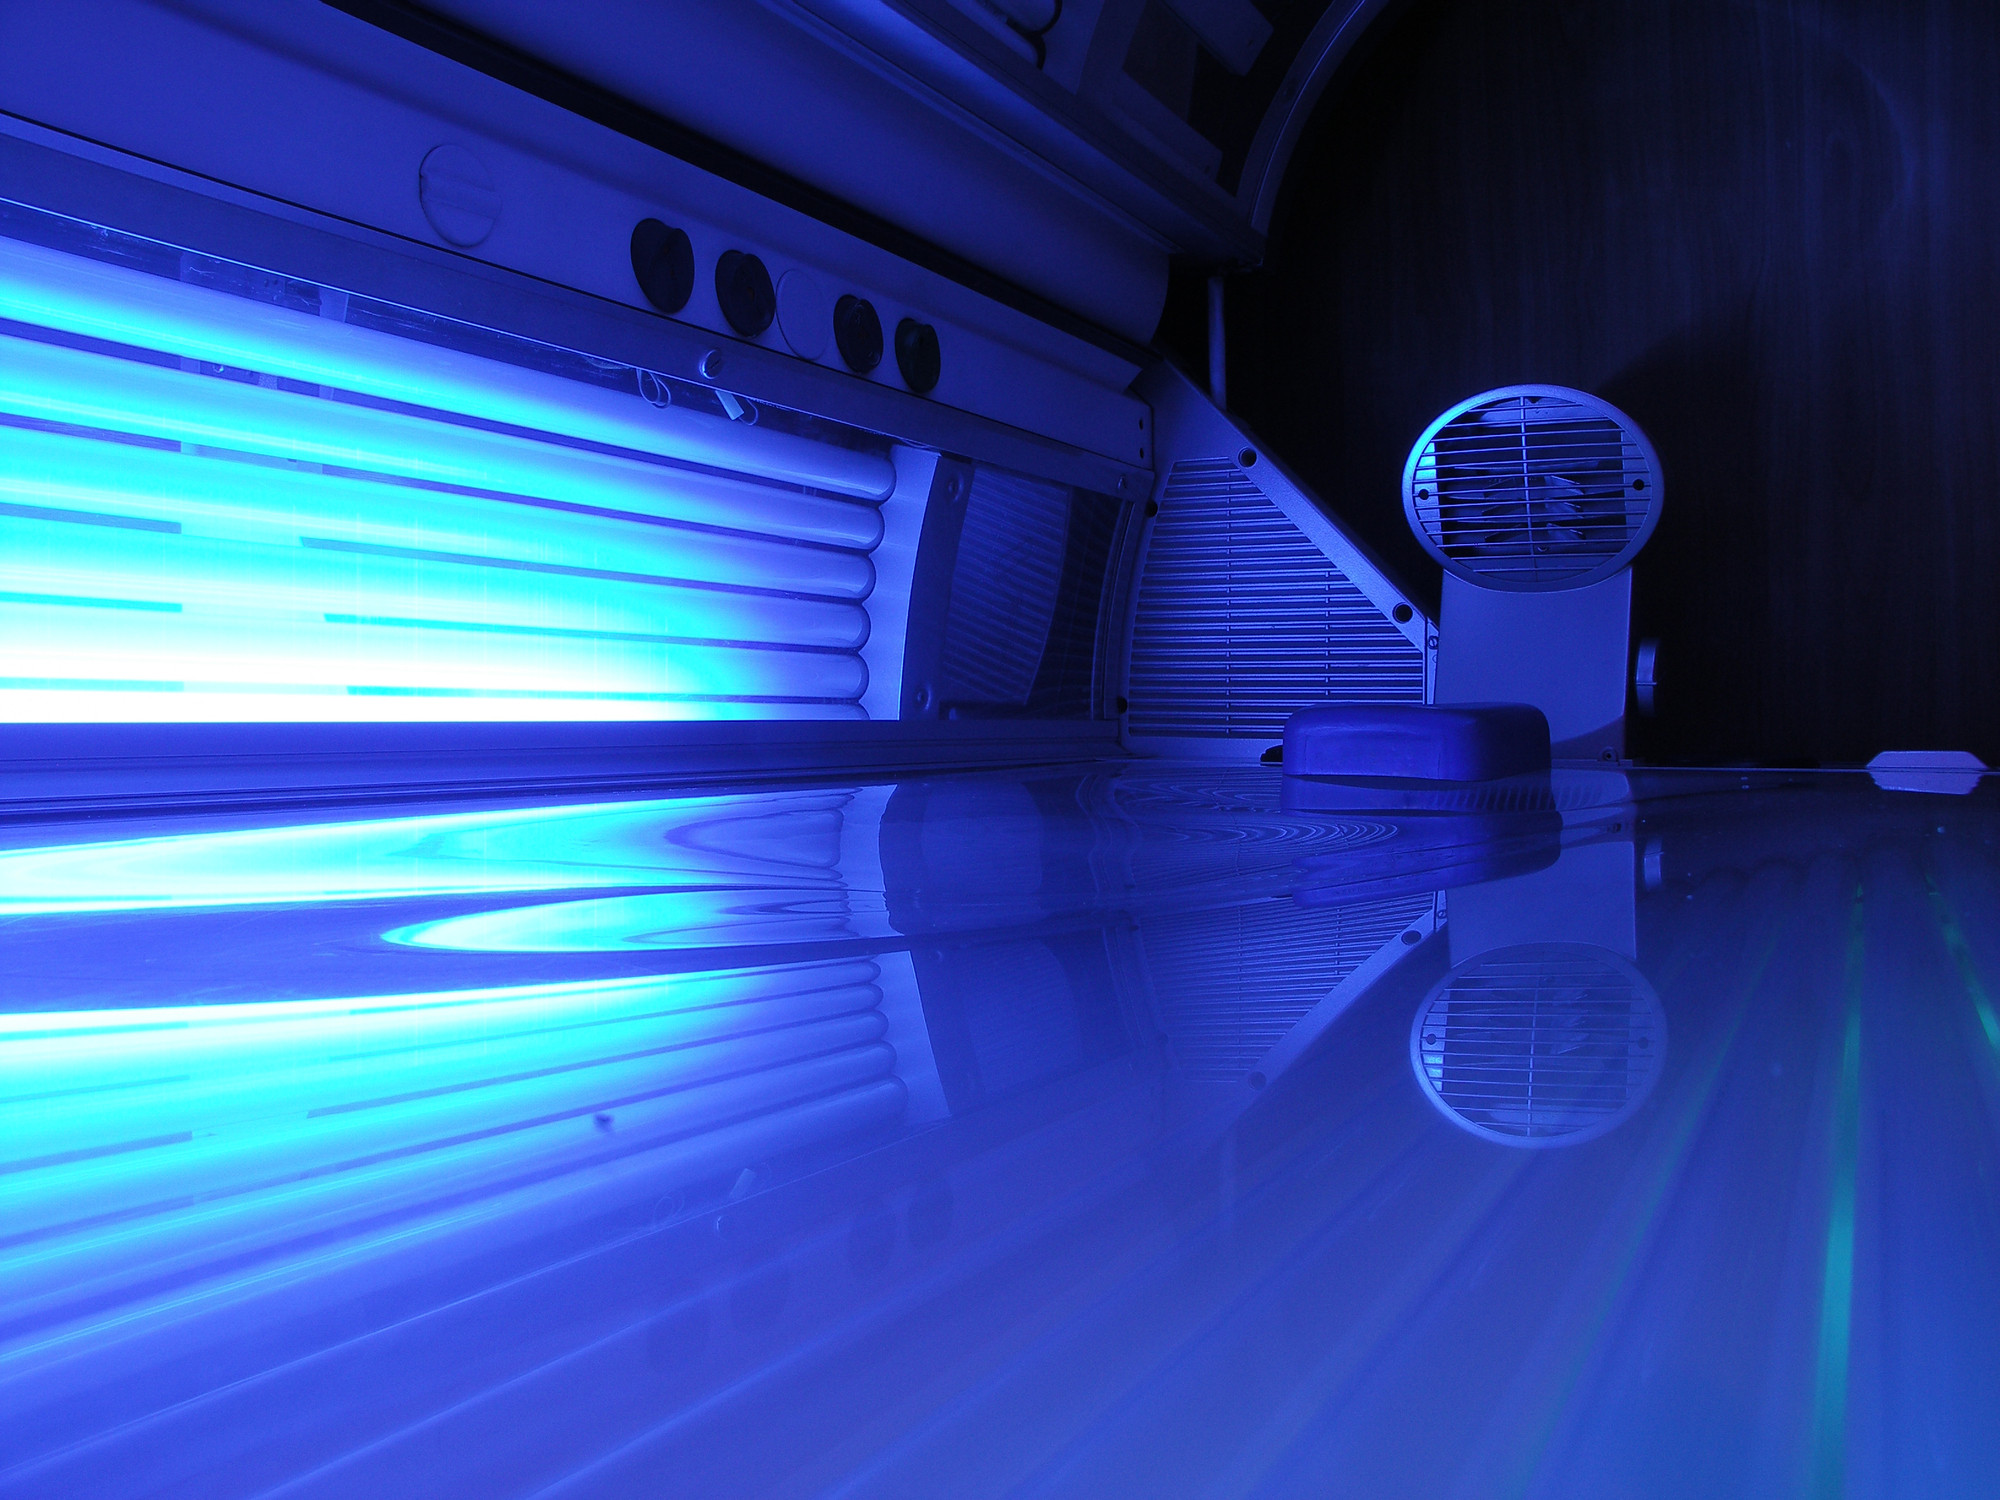 A person tanning nude in a tanning bed